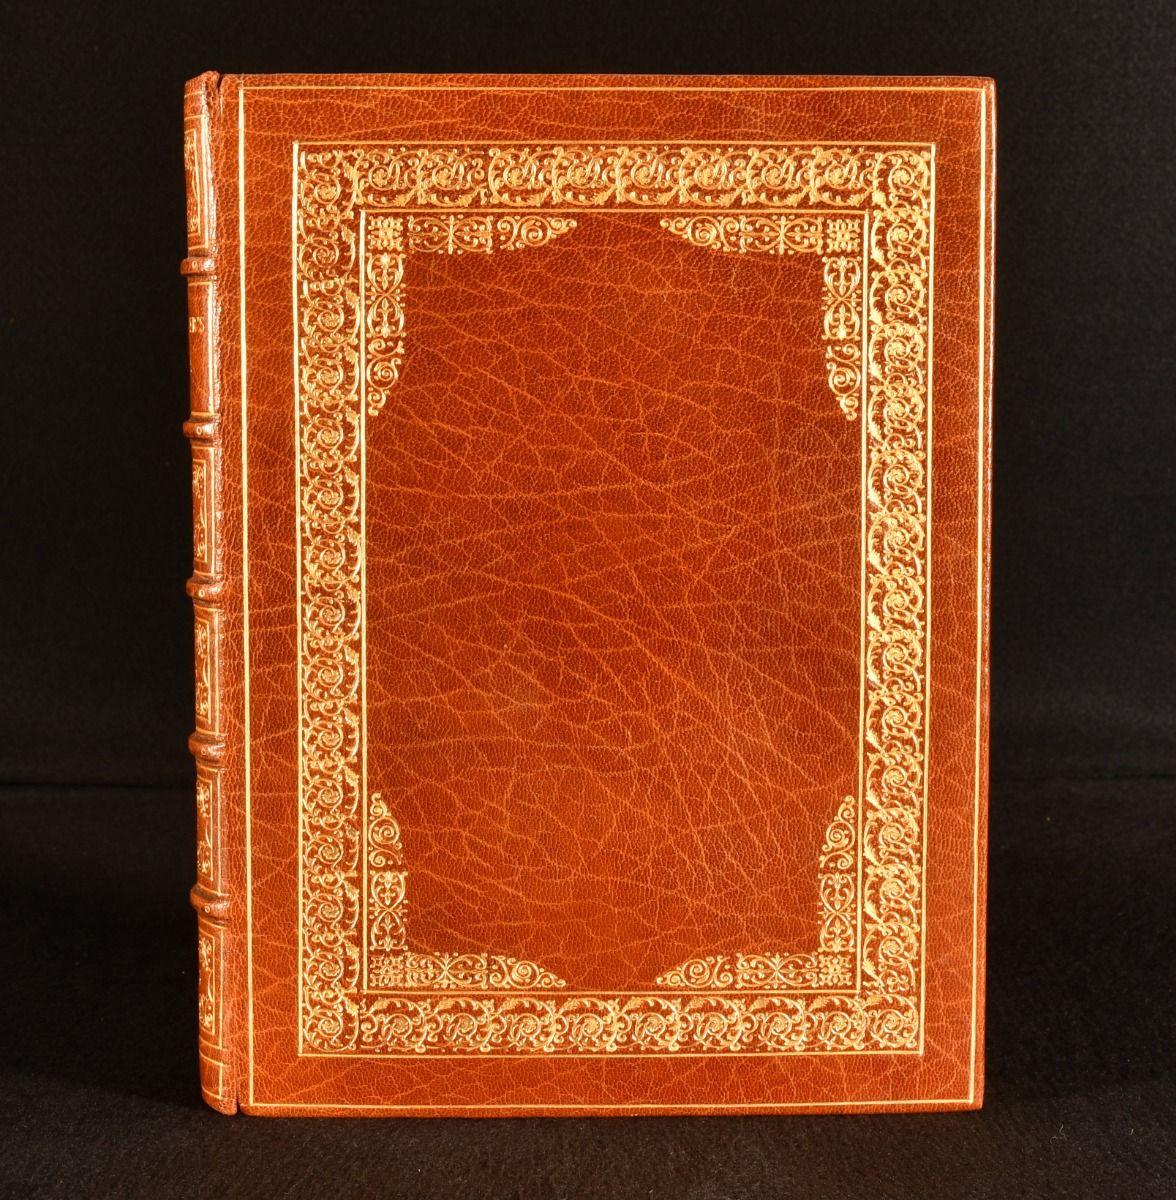 A fine limited edition of the works of the Earl of Rochester, in a sumptuous full crushed morocco binding by Bayntun Riviere.

Number 285 of a 1050 copy limitation.

In a beautiful crushed morocco signed binding by Bayntun Riviere.

A wonderful